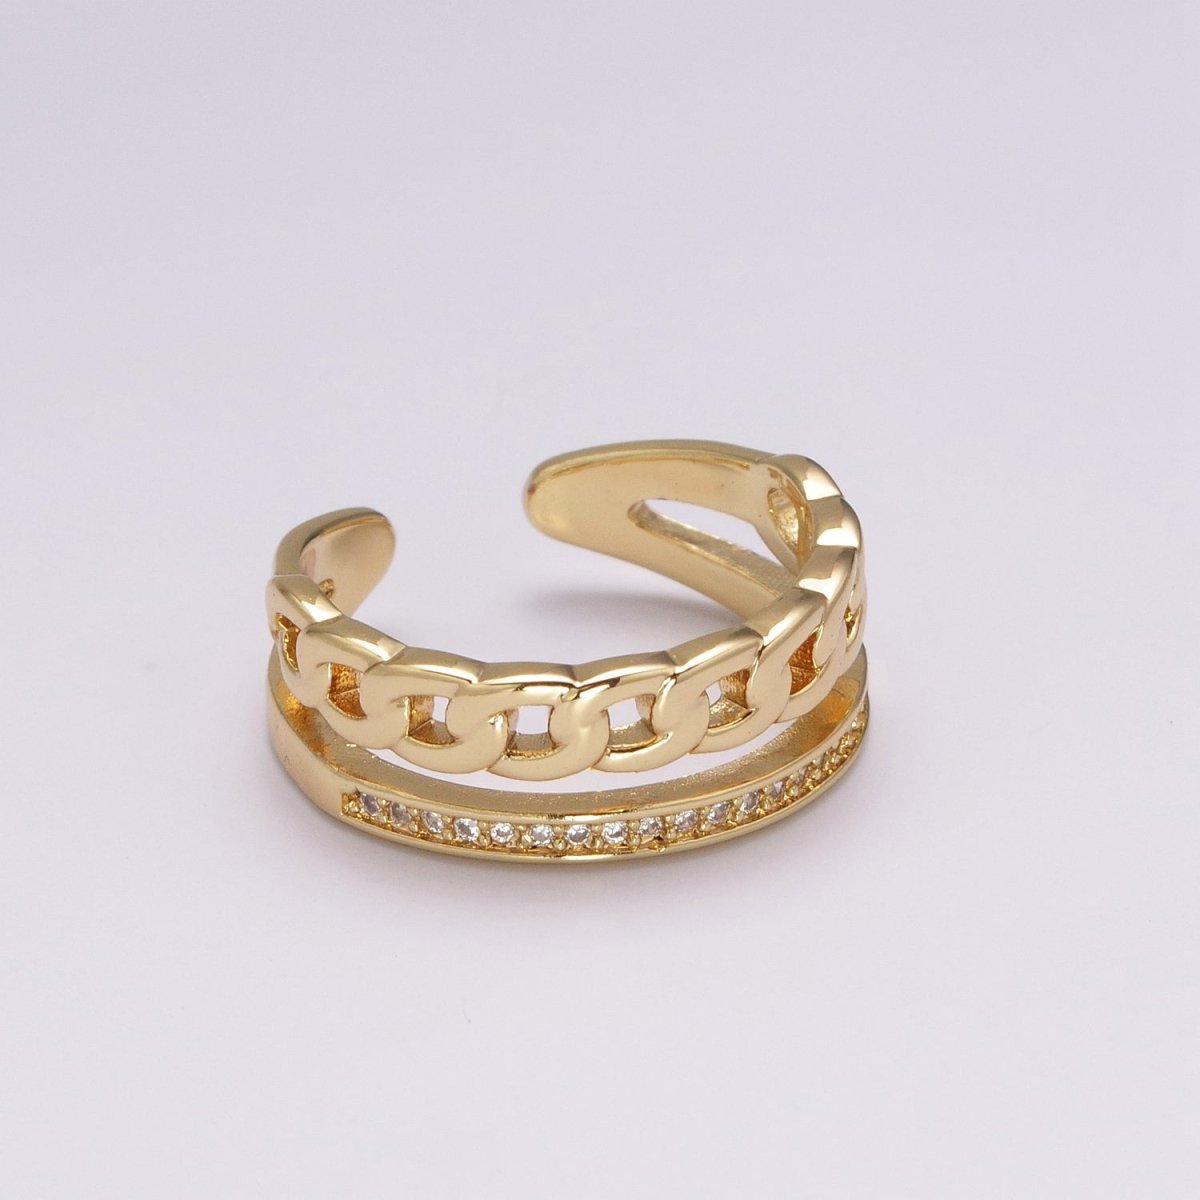 Double Band Chain Ring Design Gold Stackable Modern Minimalist Trending Ring Accessory U-129 - DLUXCA